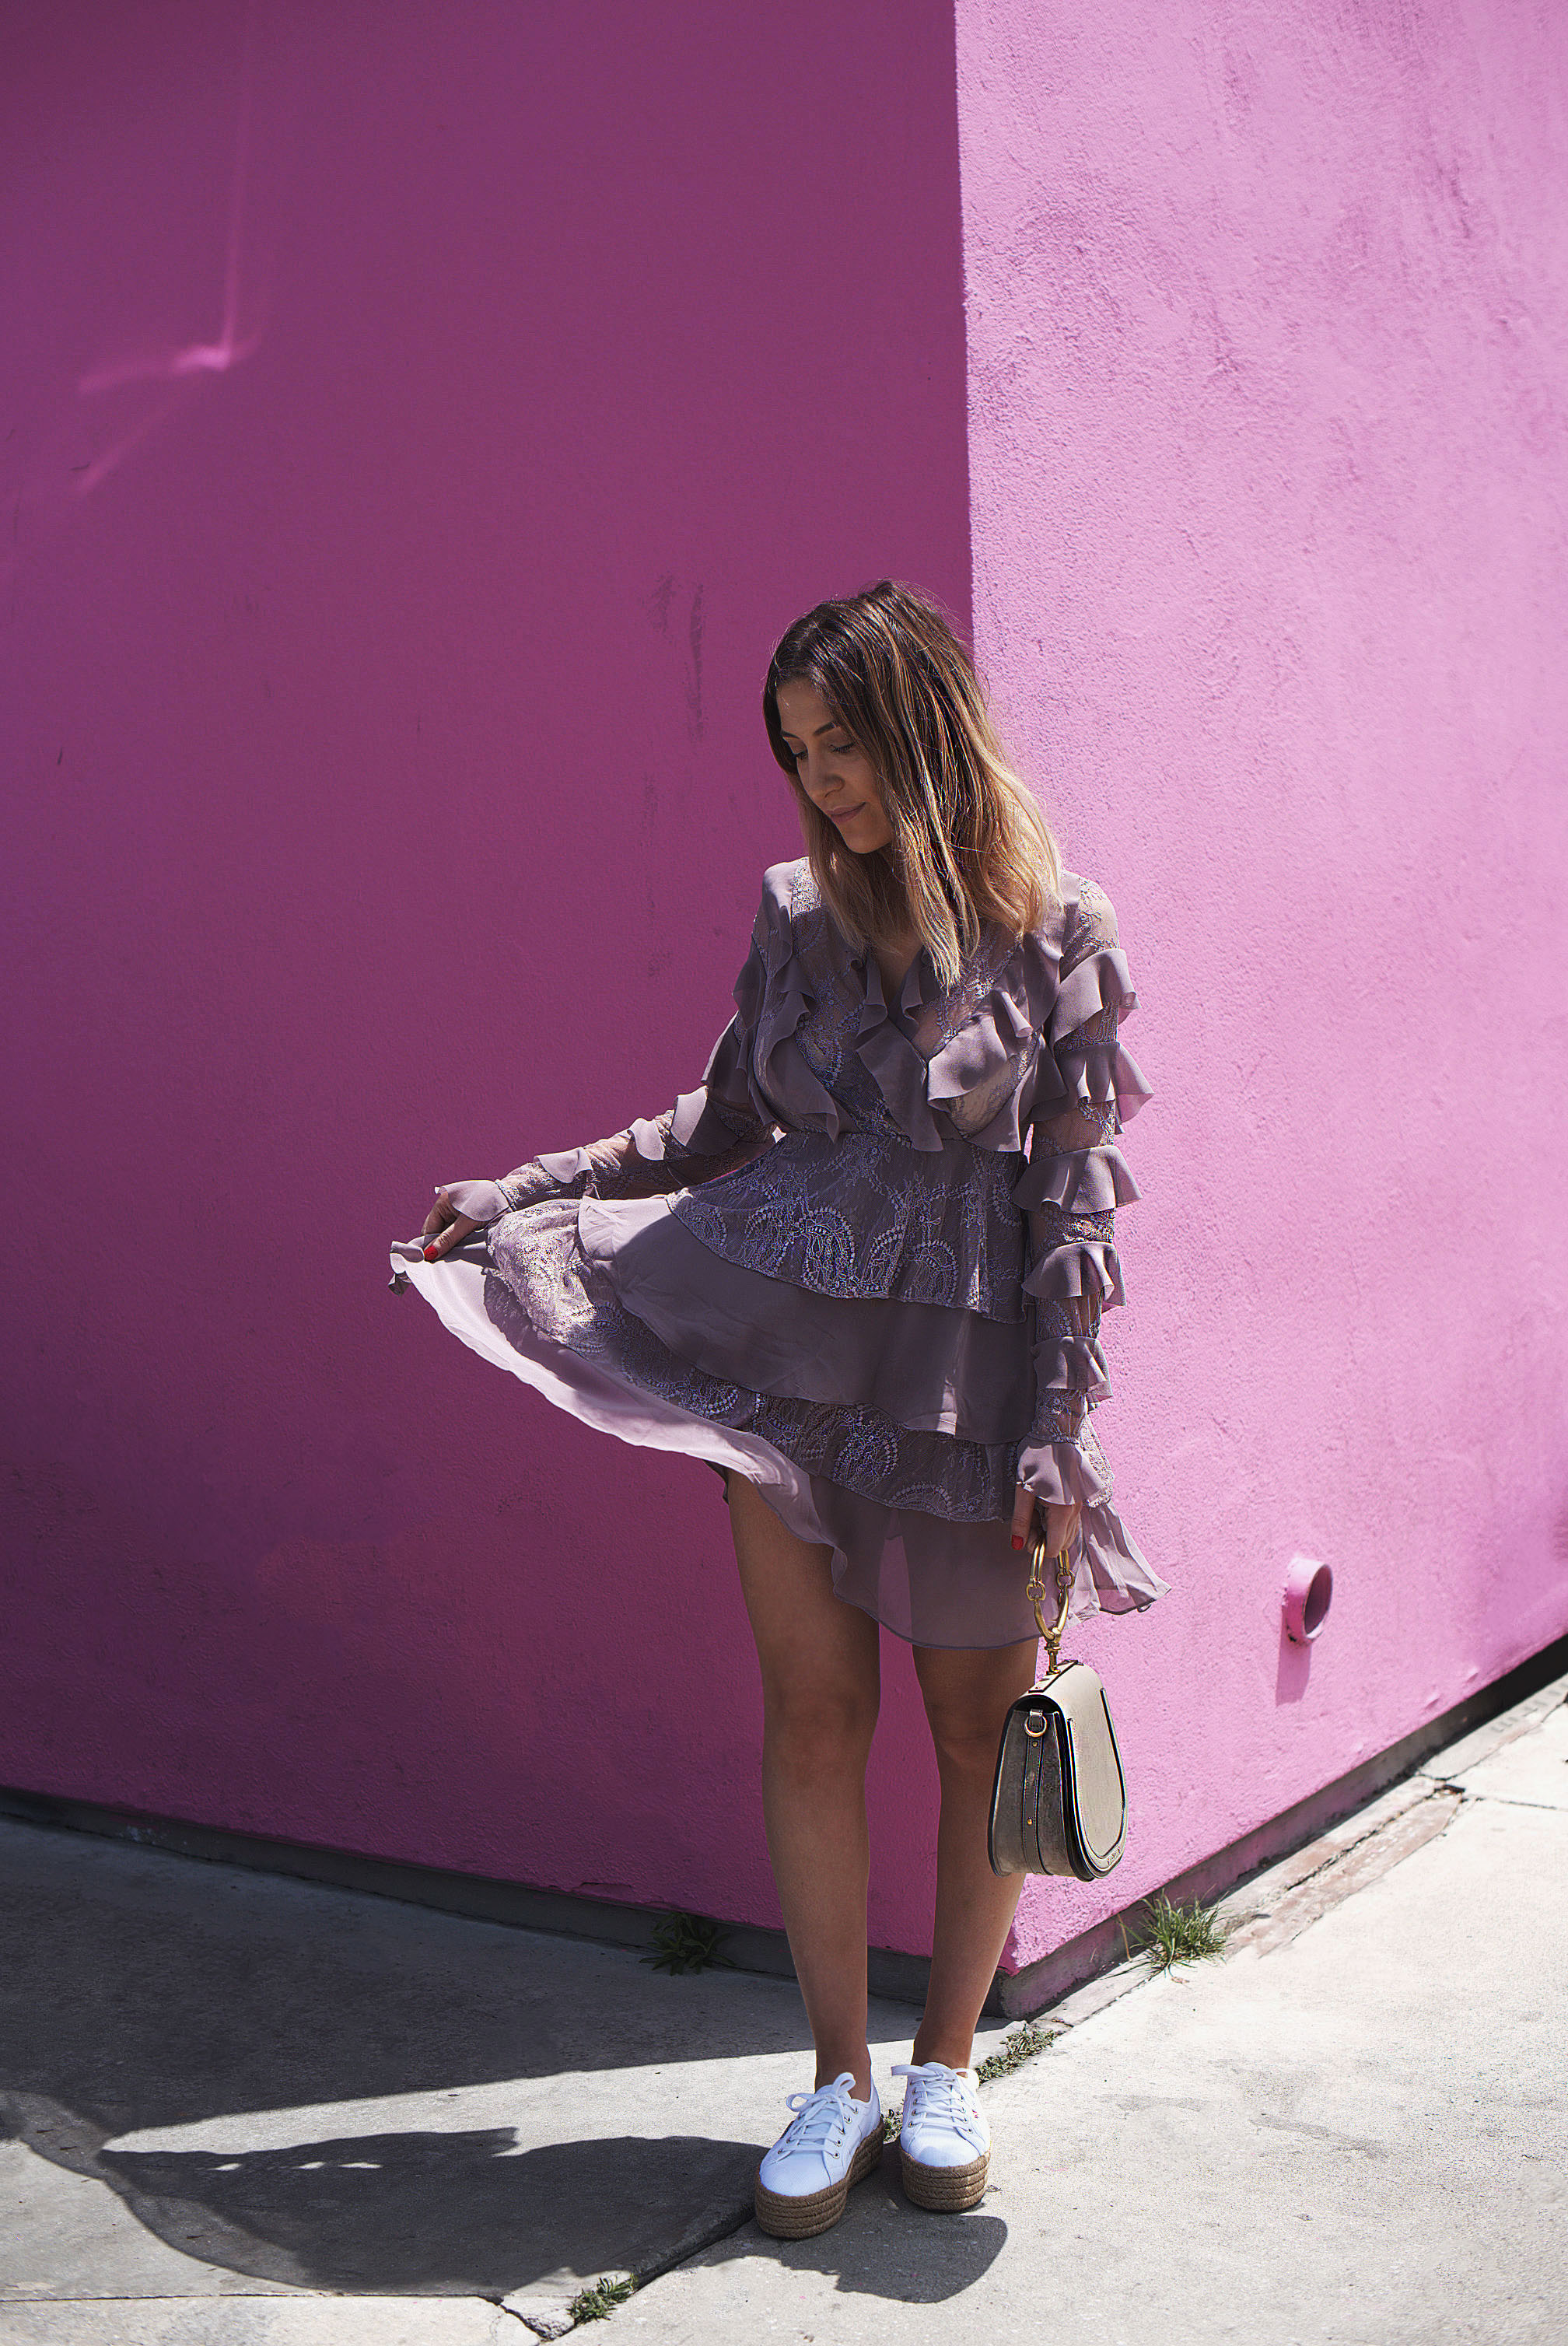 Melrose-Avenue-Blogger-18 How to spend a day in LA like a blogger